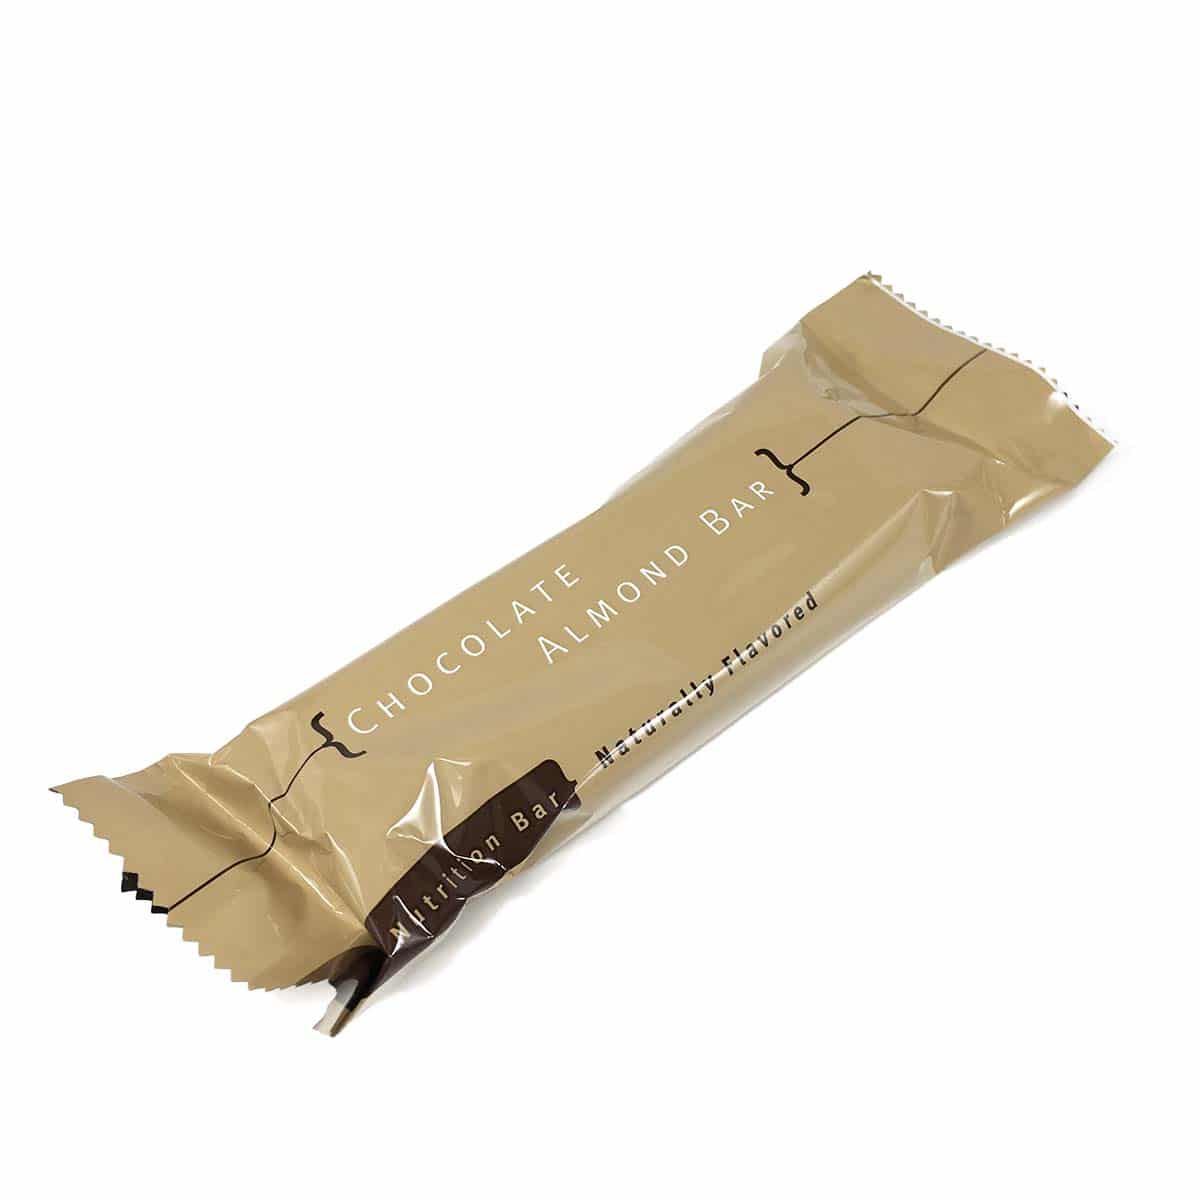 Chocolate Almond Meal Replacement Bar (7/Box) - BestMed - Doctors Weight Loss